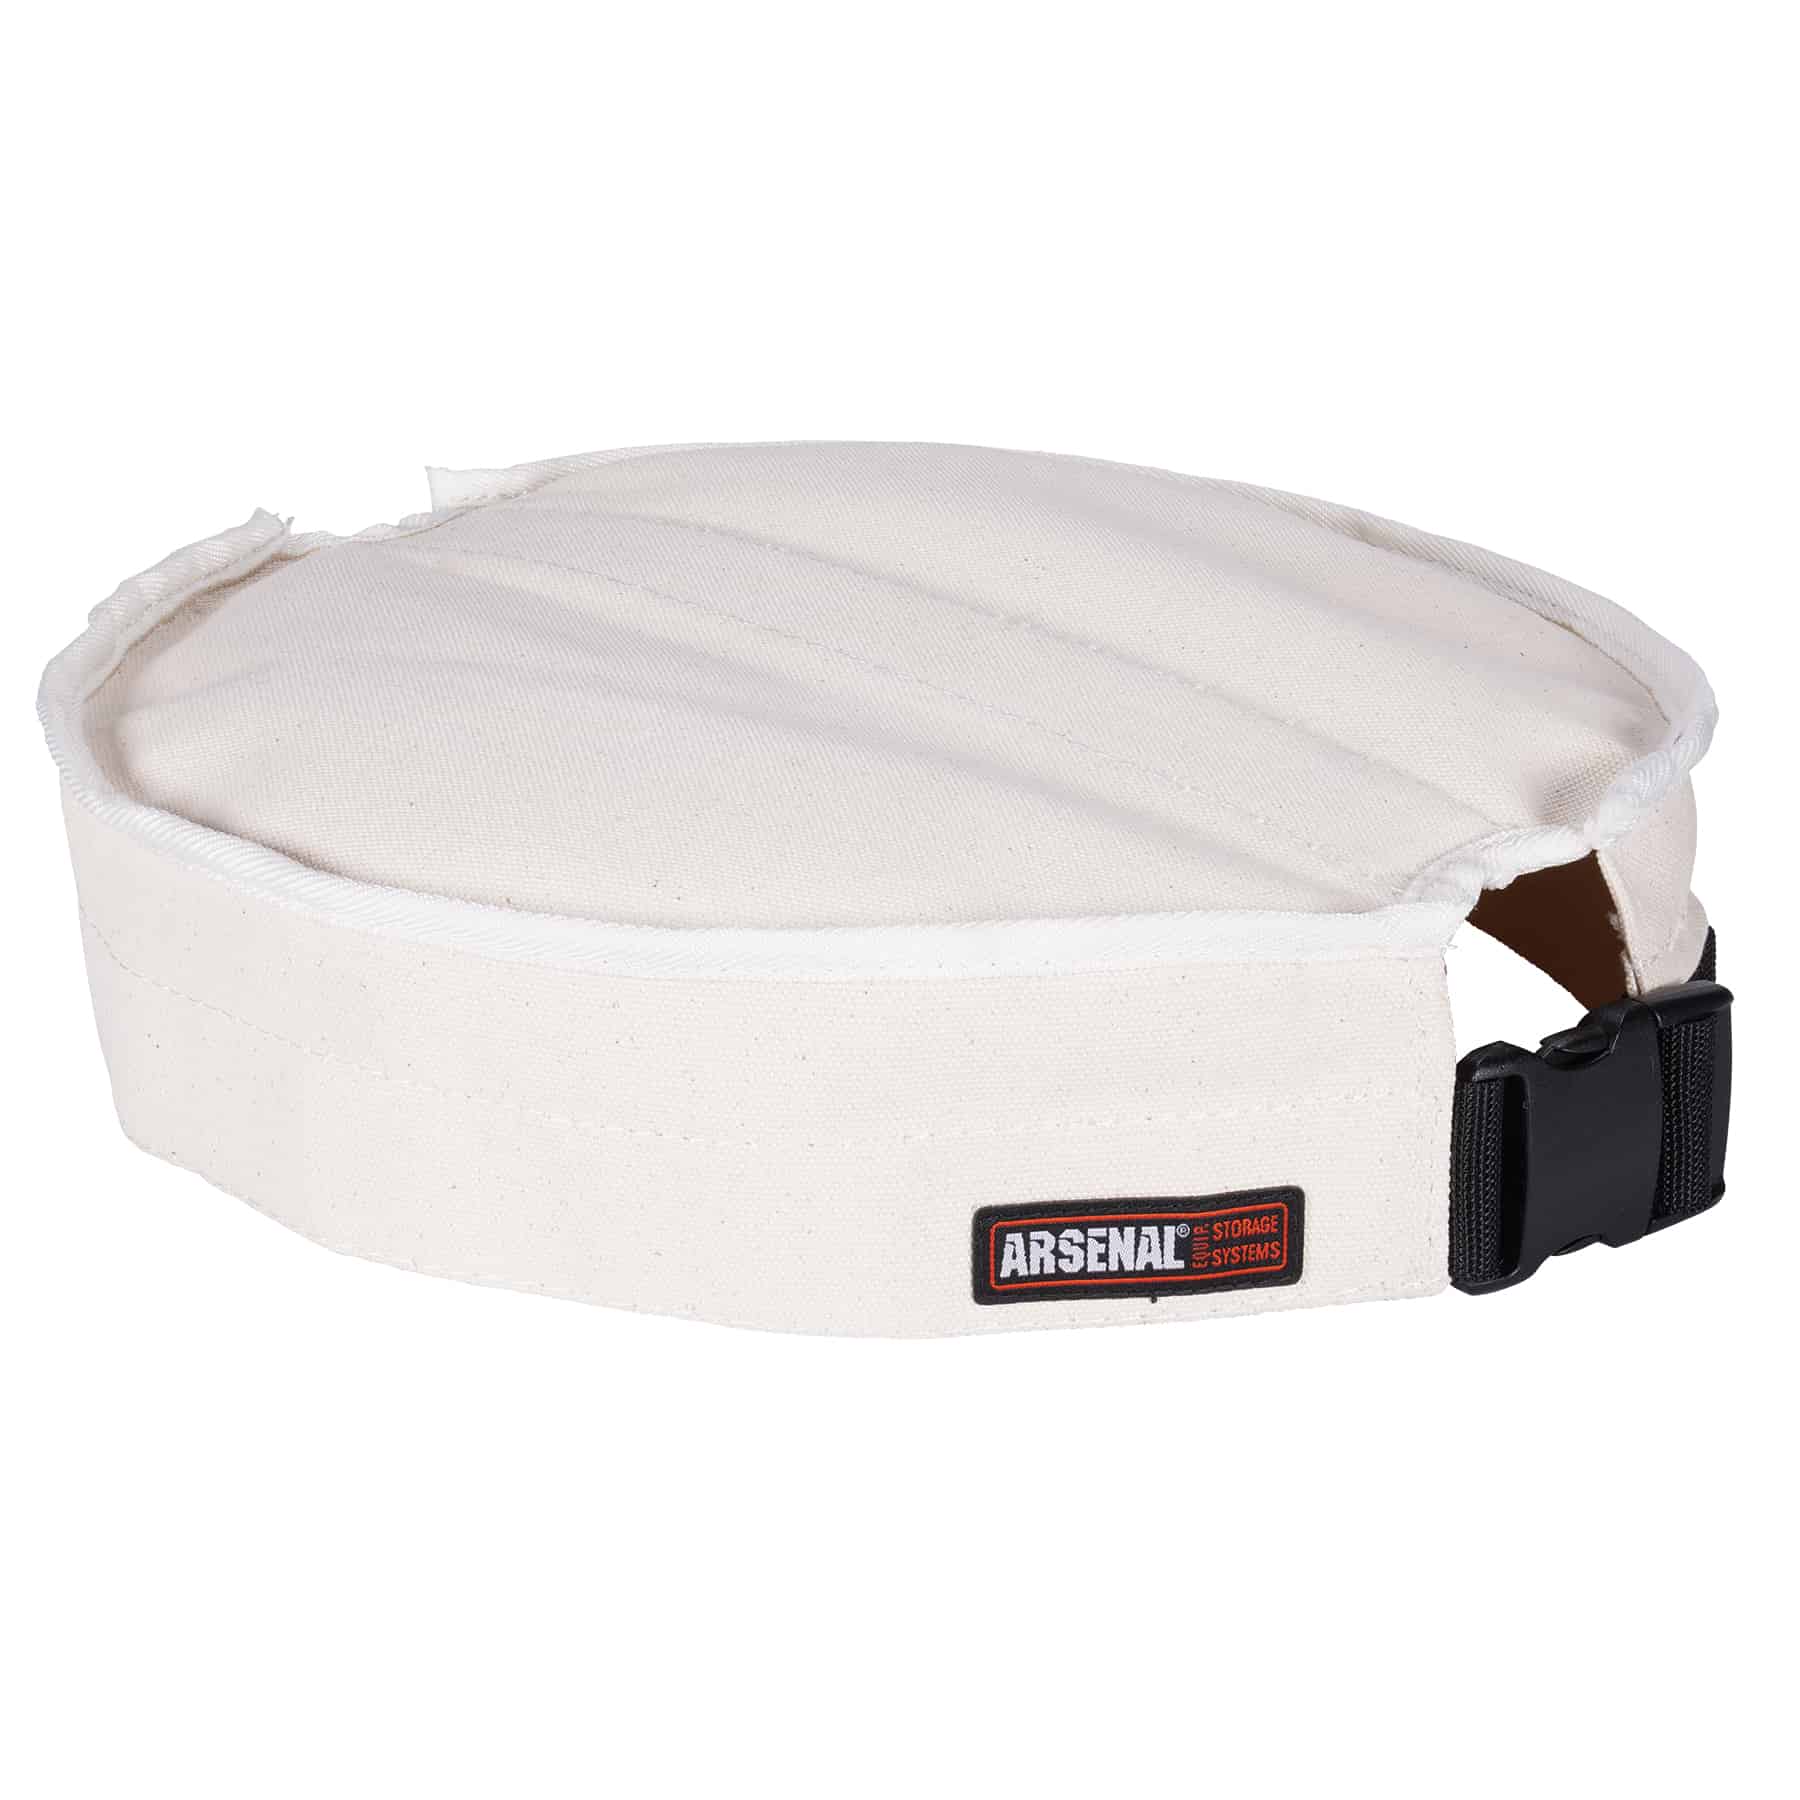 Ergodyne Arsenal 5738 12.5 Inch Canvas Bucket Safety Top from Columbia Safety